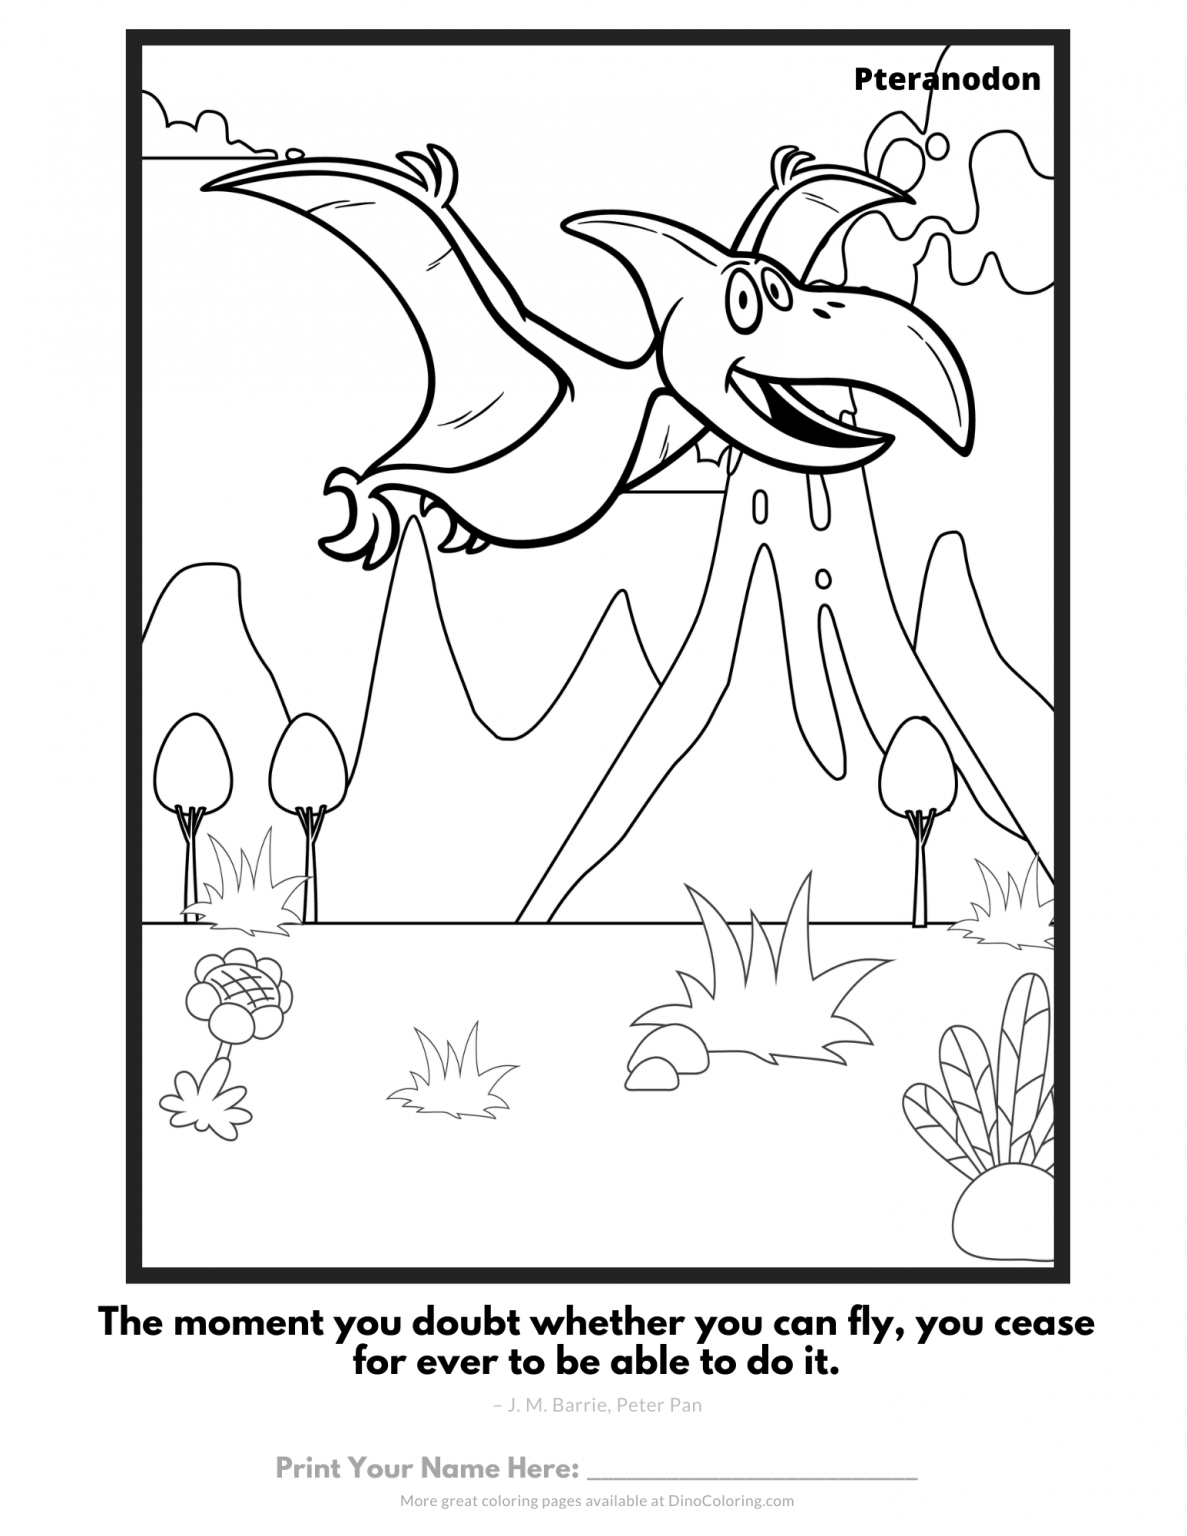 Smiling Pteranodon - Dinosaur Coloring Pages